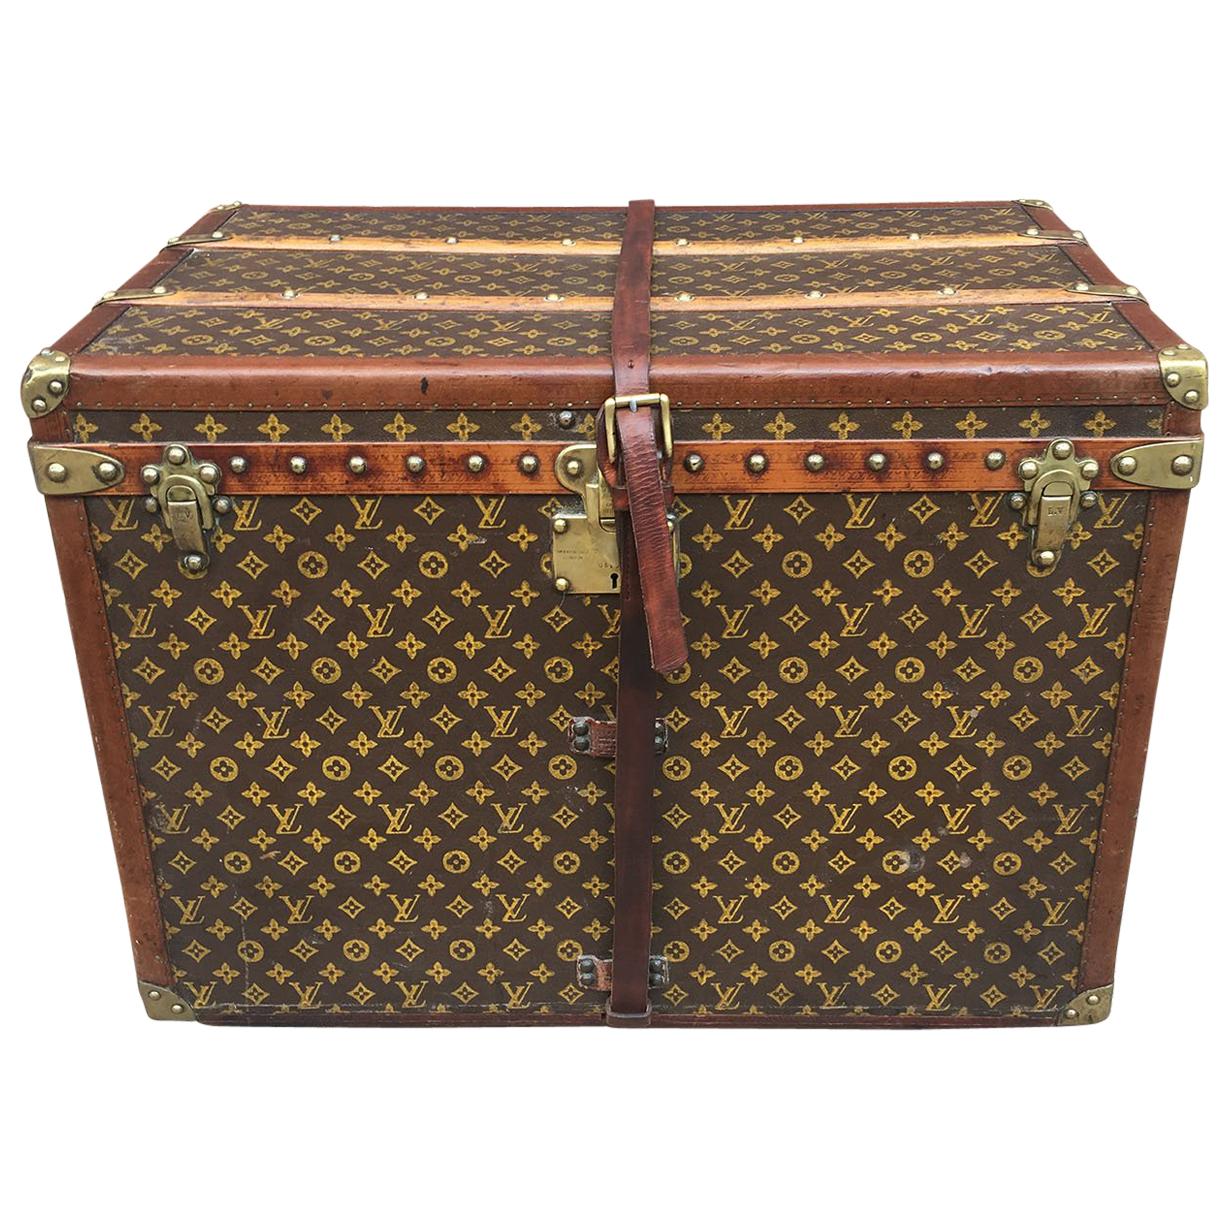 Louis Vuitton Antique Monogram Small Steamer Trunk with Basket Tray c1920s